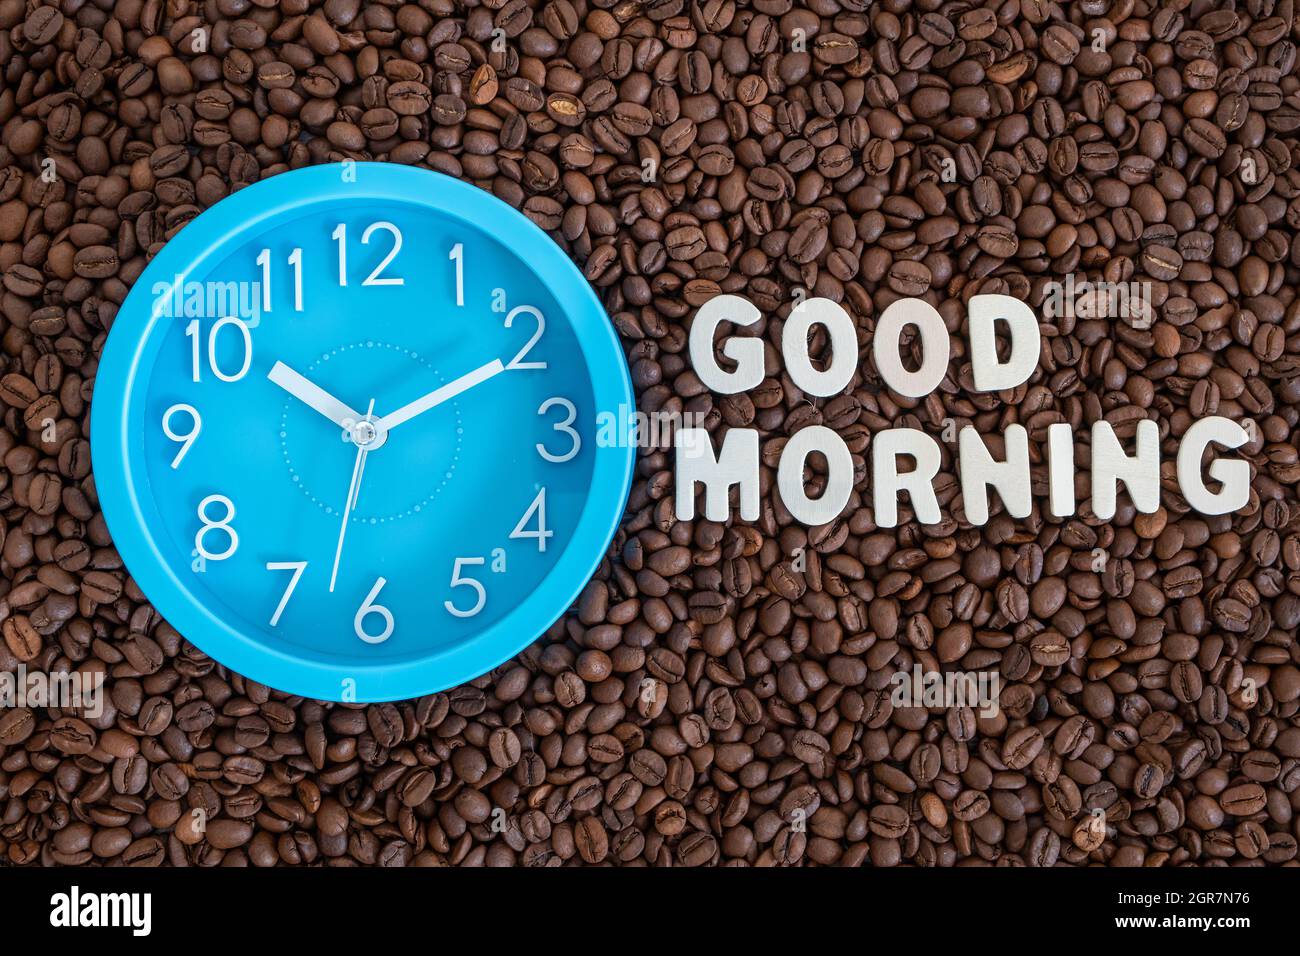 Blue Clock With Good Morning Words On Brown Coffee Beans ...